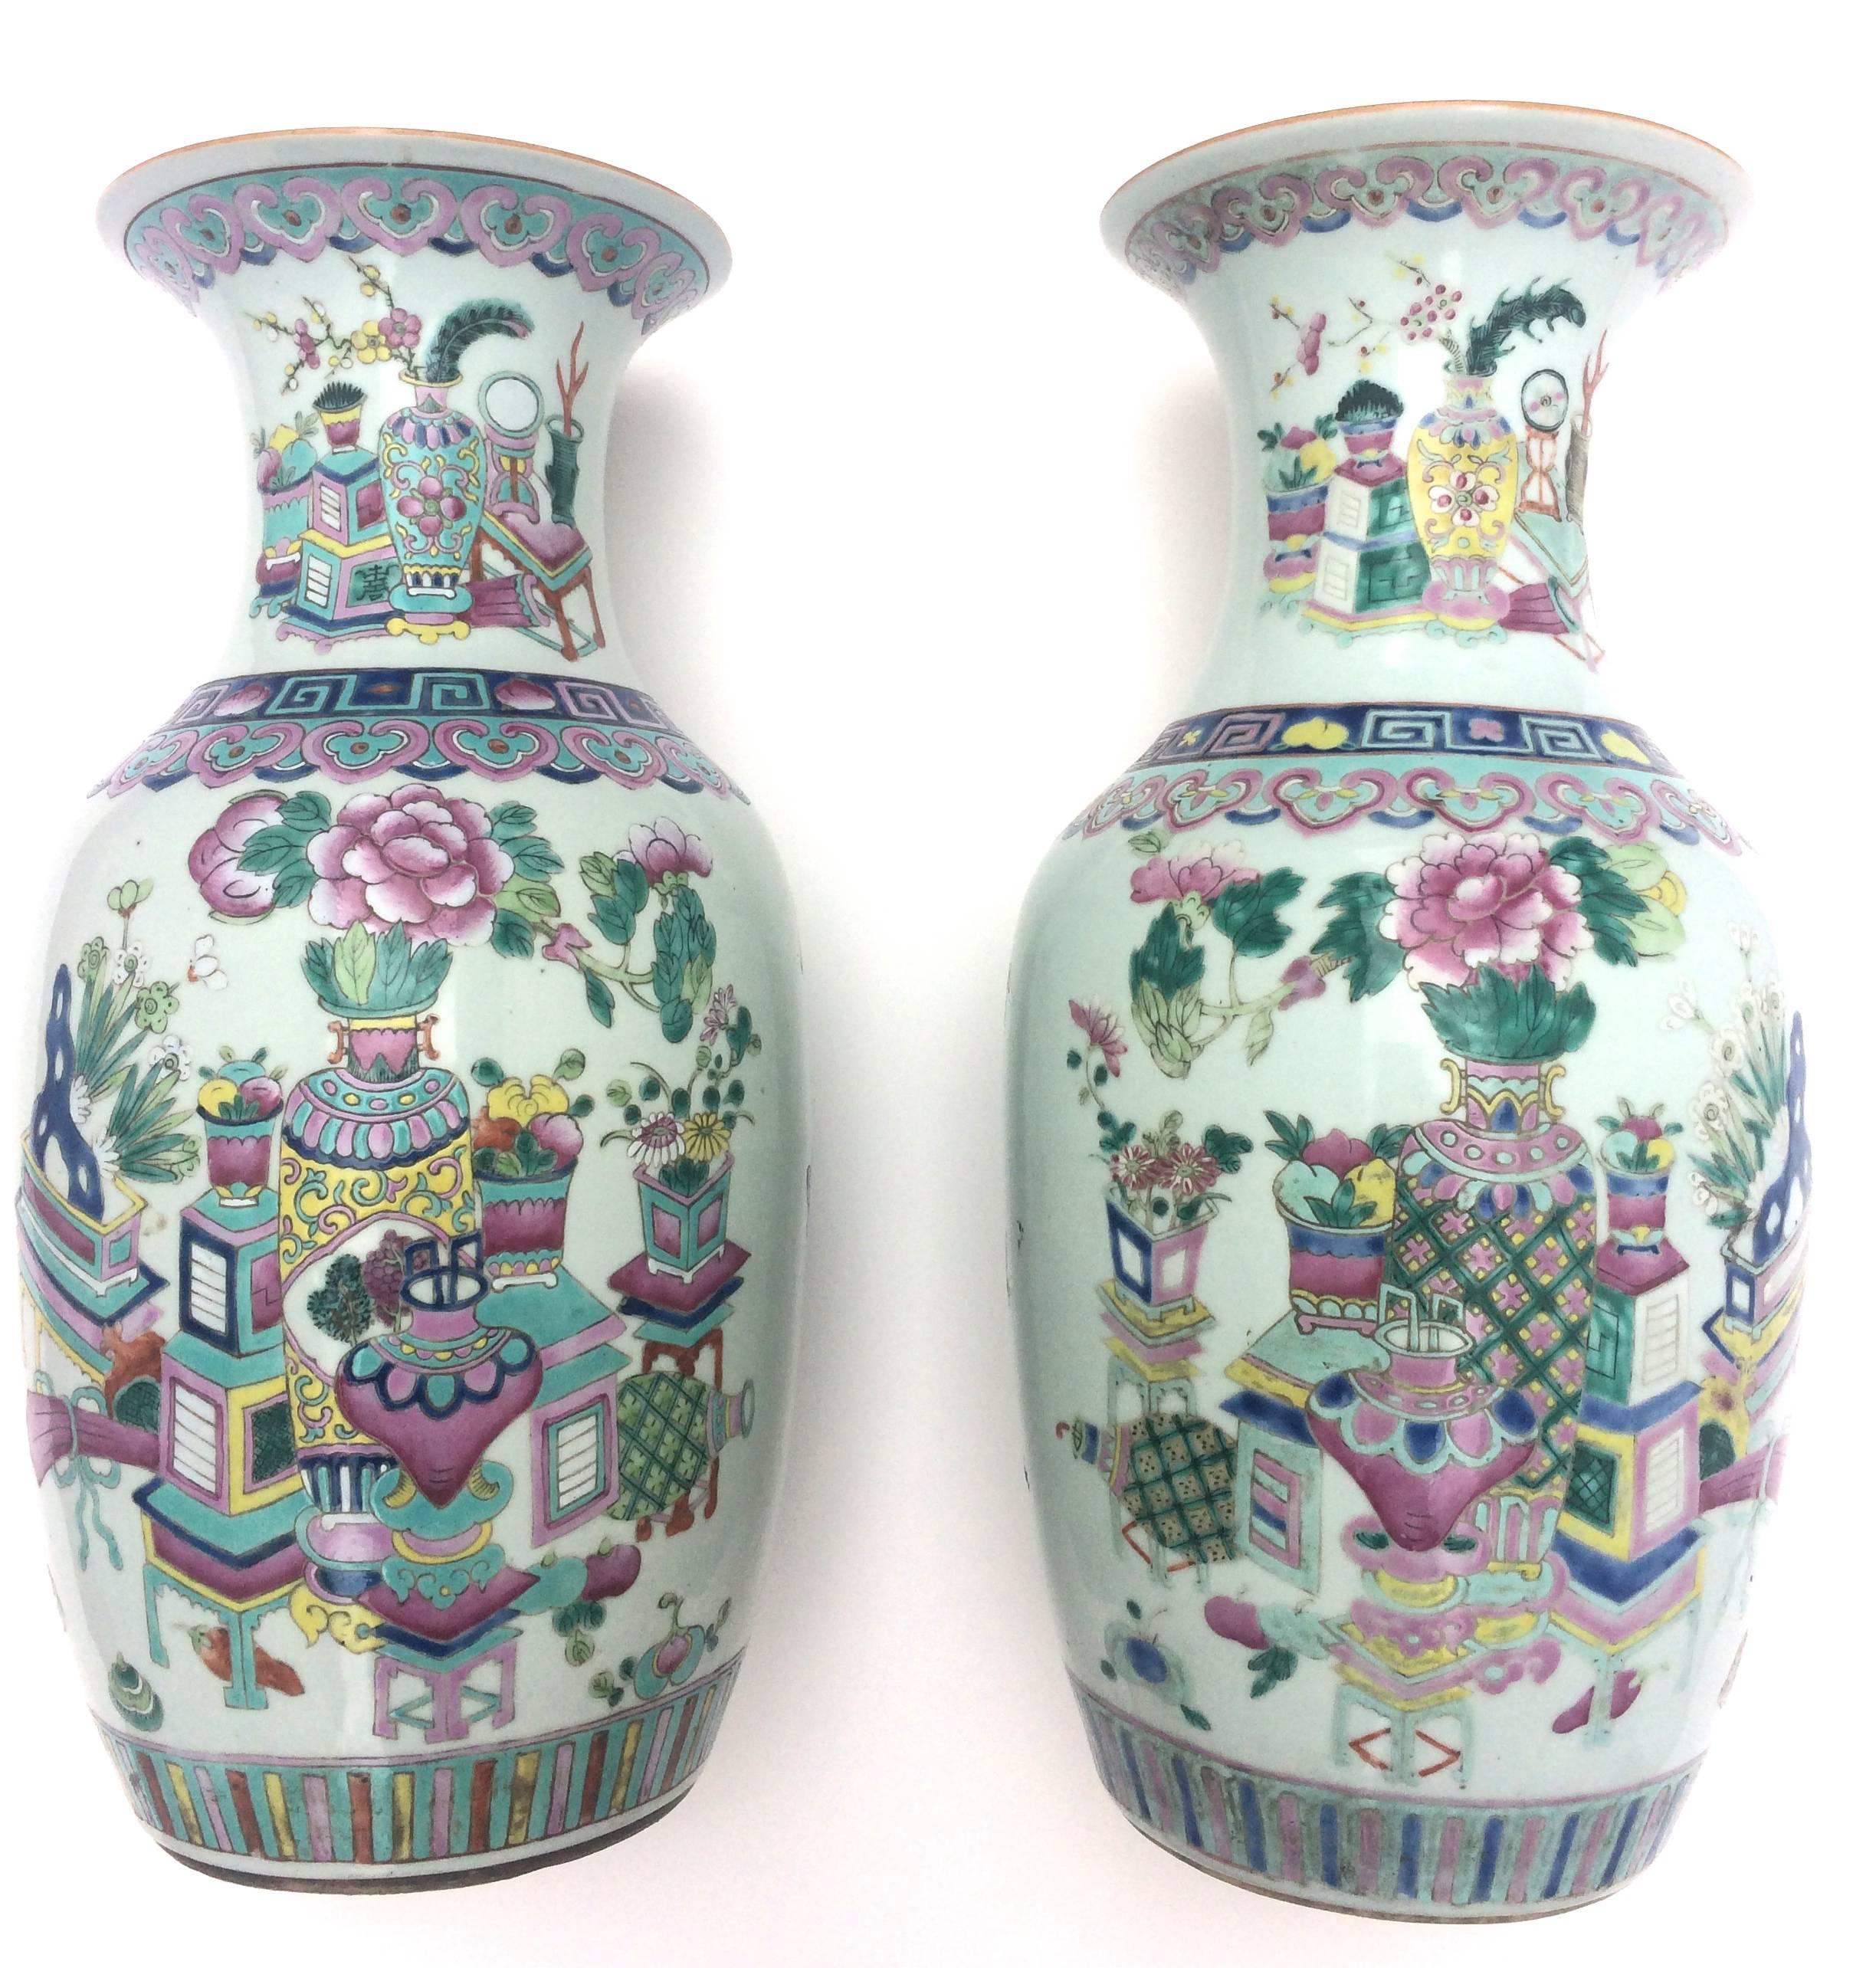 Unknown Figurative Sculpture -  Rose Medallion Chinese Porcelain Pair of Vases